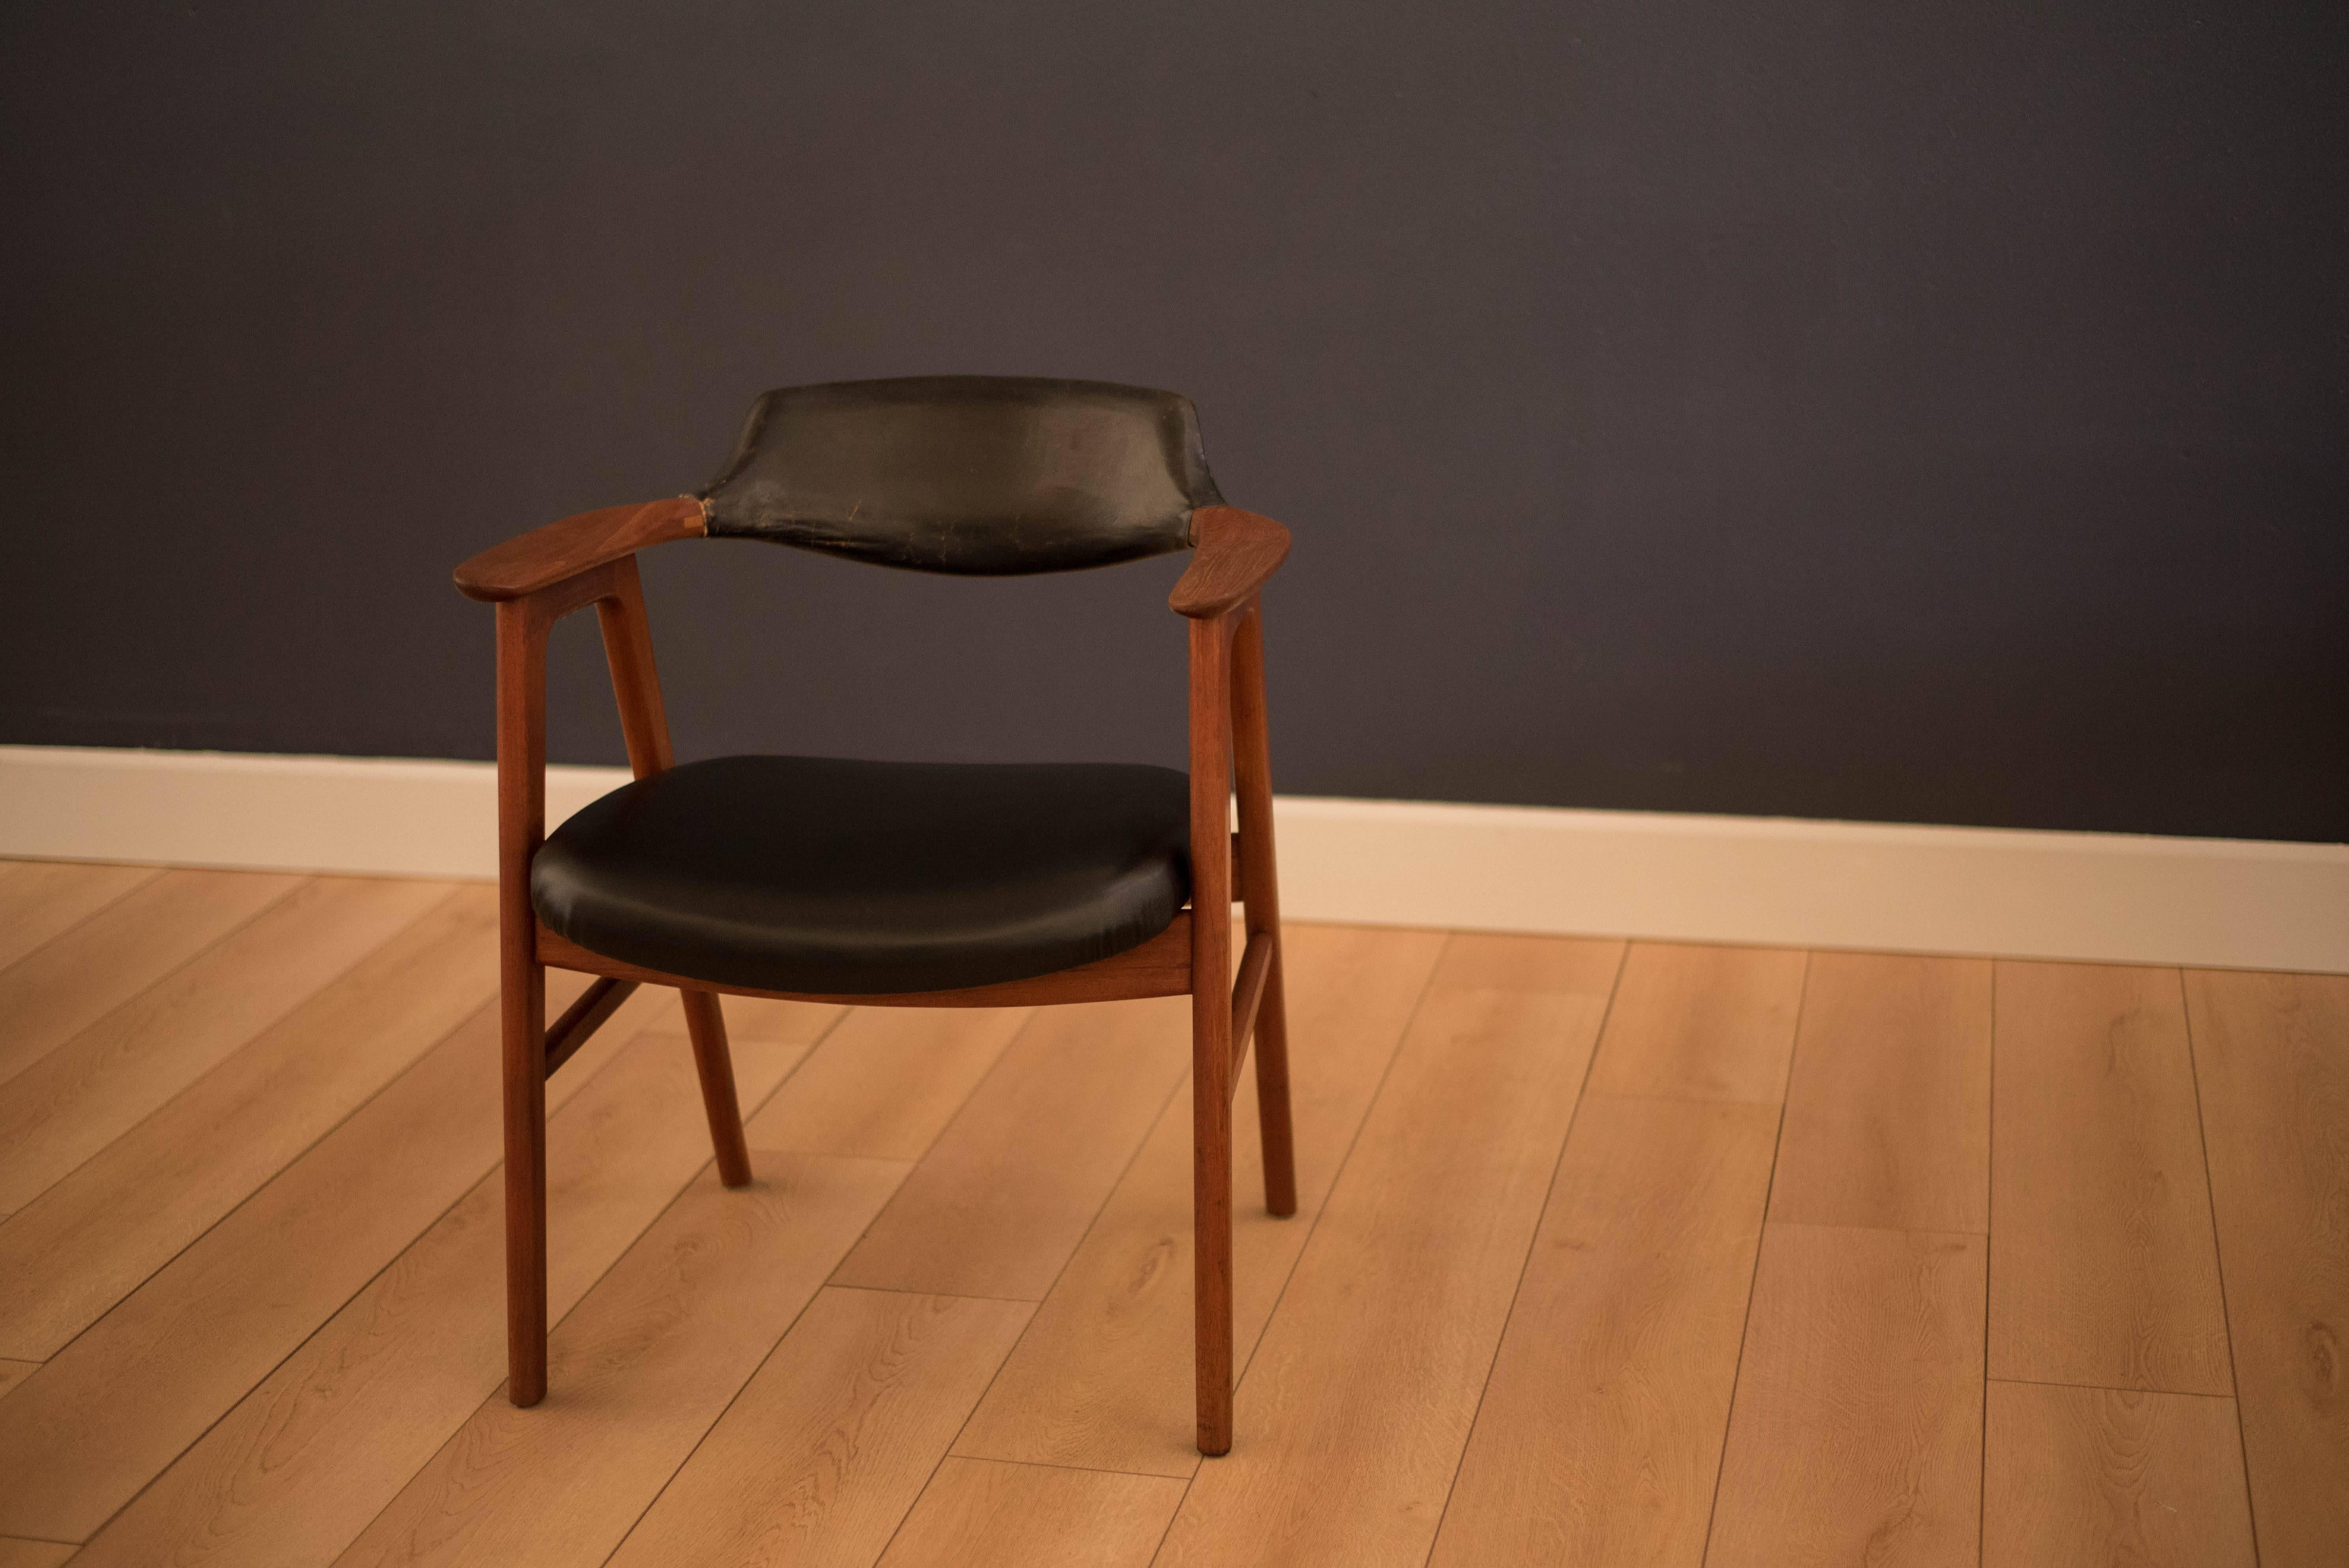 Danish modern armchair by Erik Kirkegaard in teak. This piece features a curved backrest with beautifully aged leather. Constructed of solid teak and displays quality craftsmanship.
  